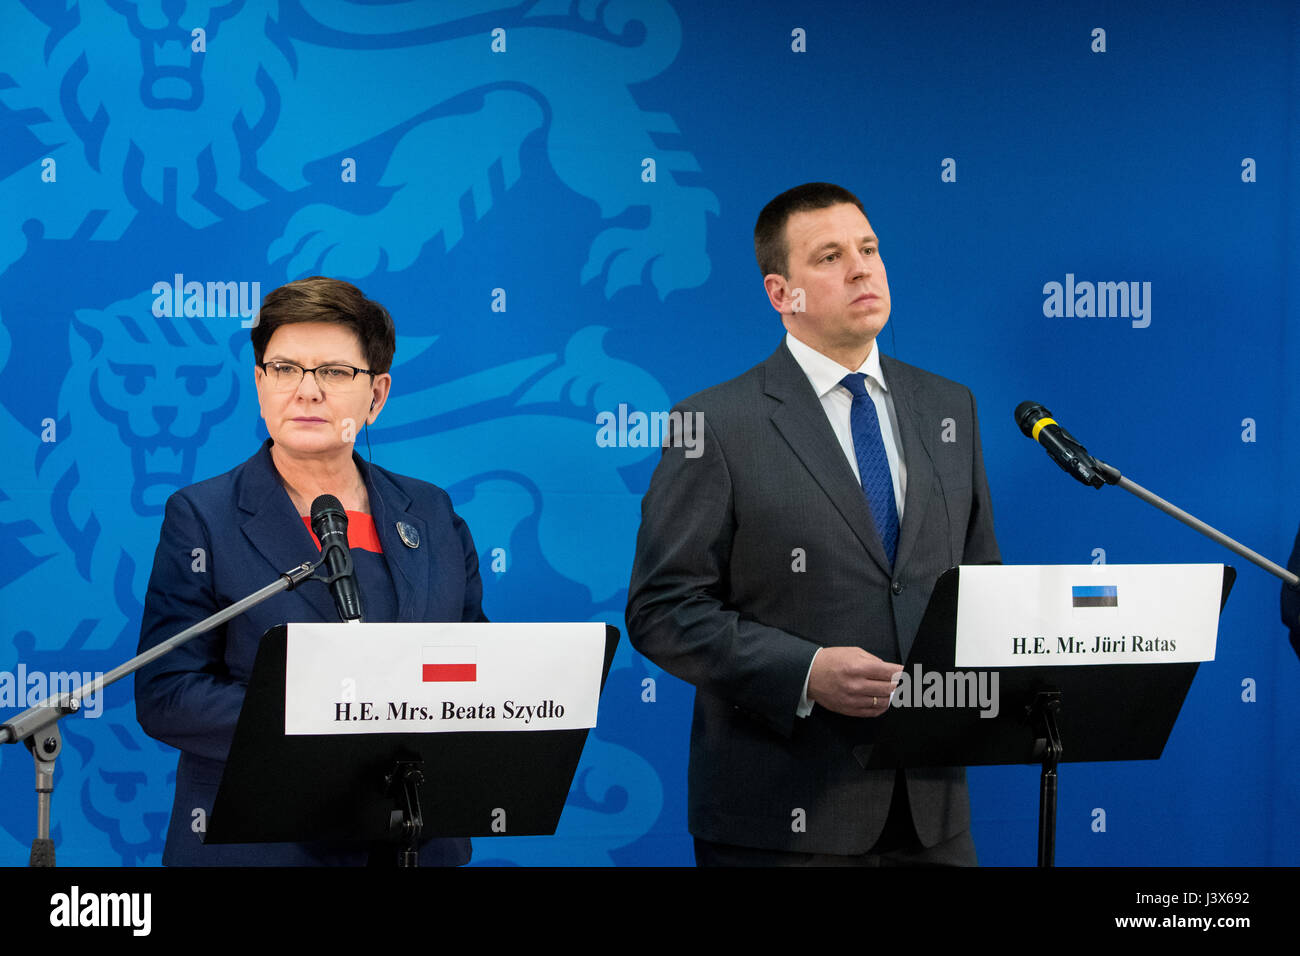 Tallinn, Estonia, 8th May 2017. Prime Minister of Poland Beata Szydlo adresses the media after she met Prime Minister of Estonia Juri Ratas, Prime Minister of Latvia Maris Kucinskis, Prime Minister of Lithuania Saulius Skvernelis and Prime Minister of Poland Beata Szydlo in Tallinn. The topics of the meeting were regional security, energy community, transport connections and the future of the European Union. Credit: Nicolas Bouvy/Alamy Live News Stock Photo